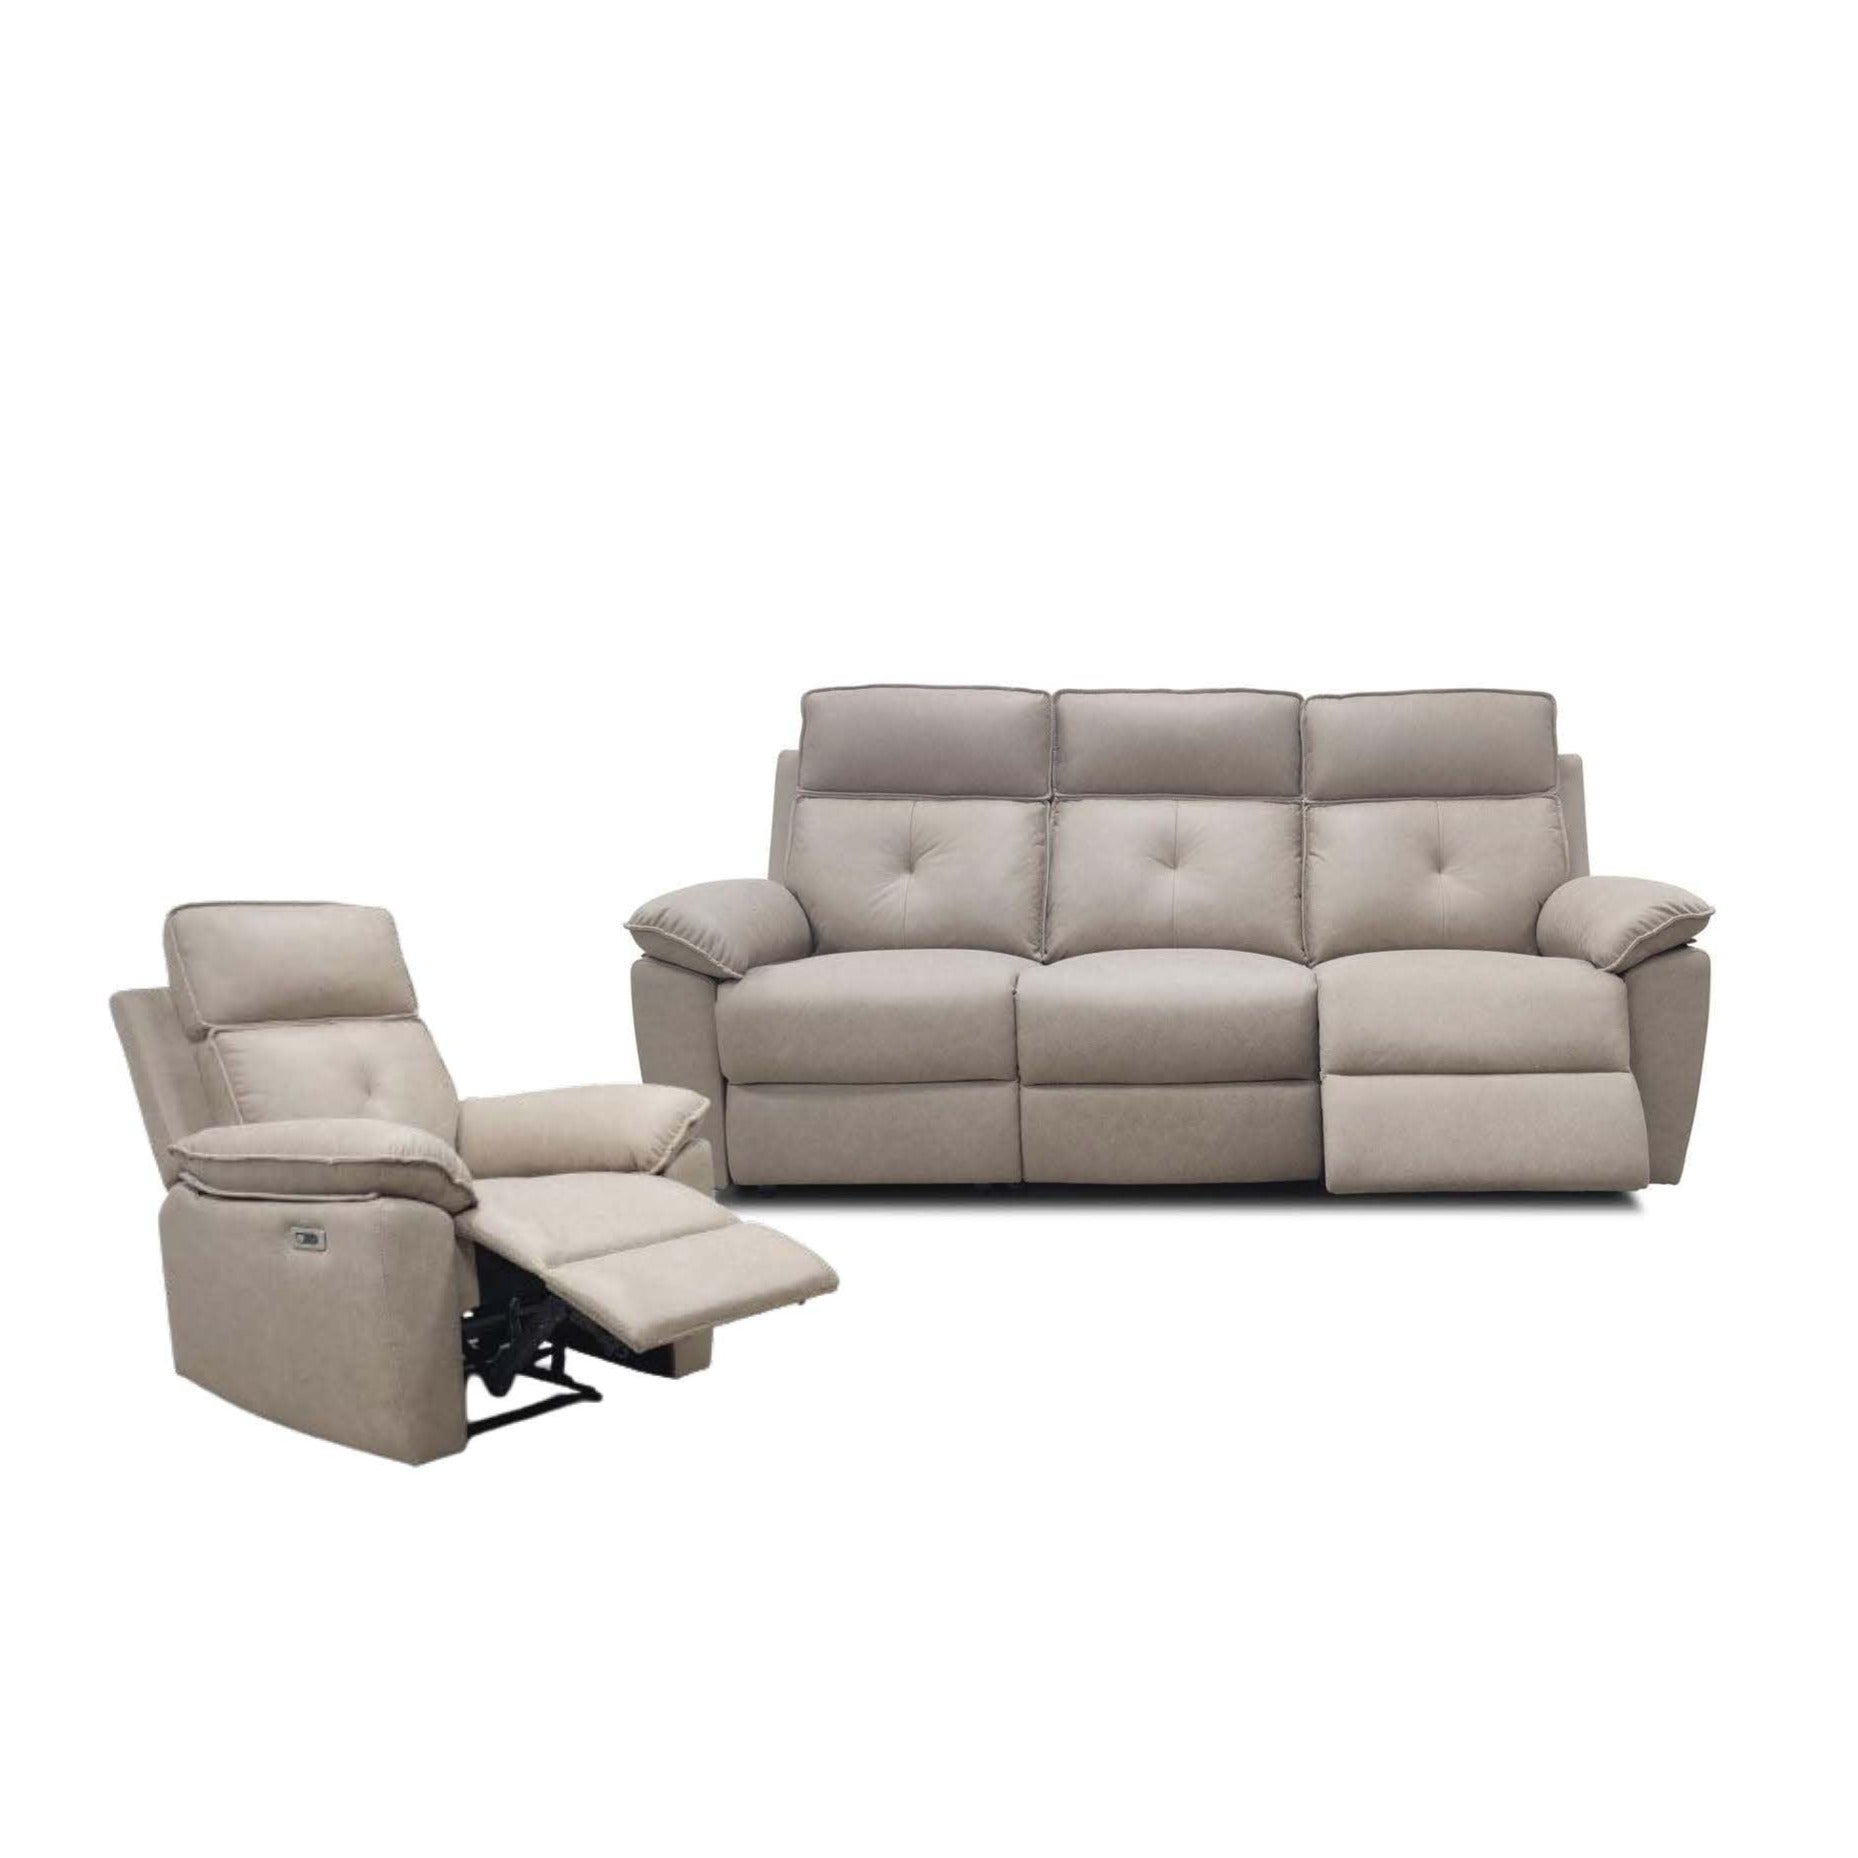 Americana Top Grain Full Leather Electric Recliner Sofa 1/2/3-Seater RC0750 (I) picket and rail